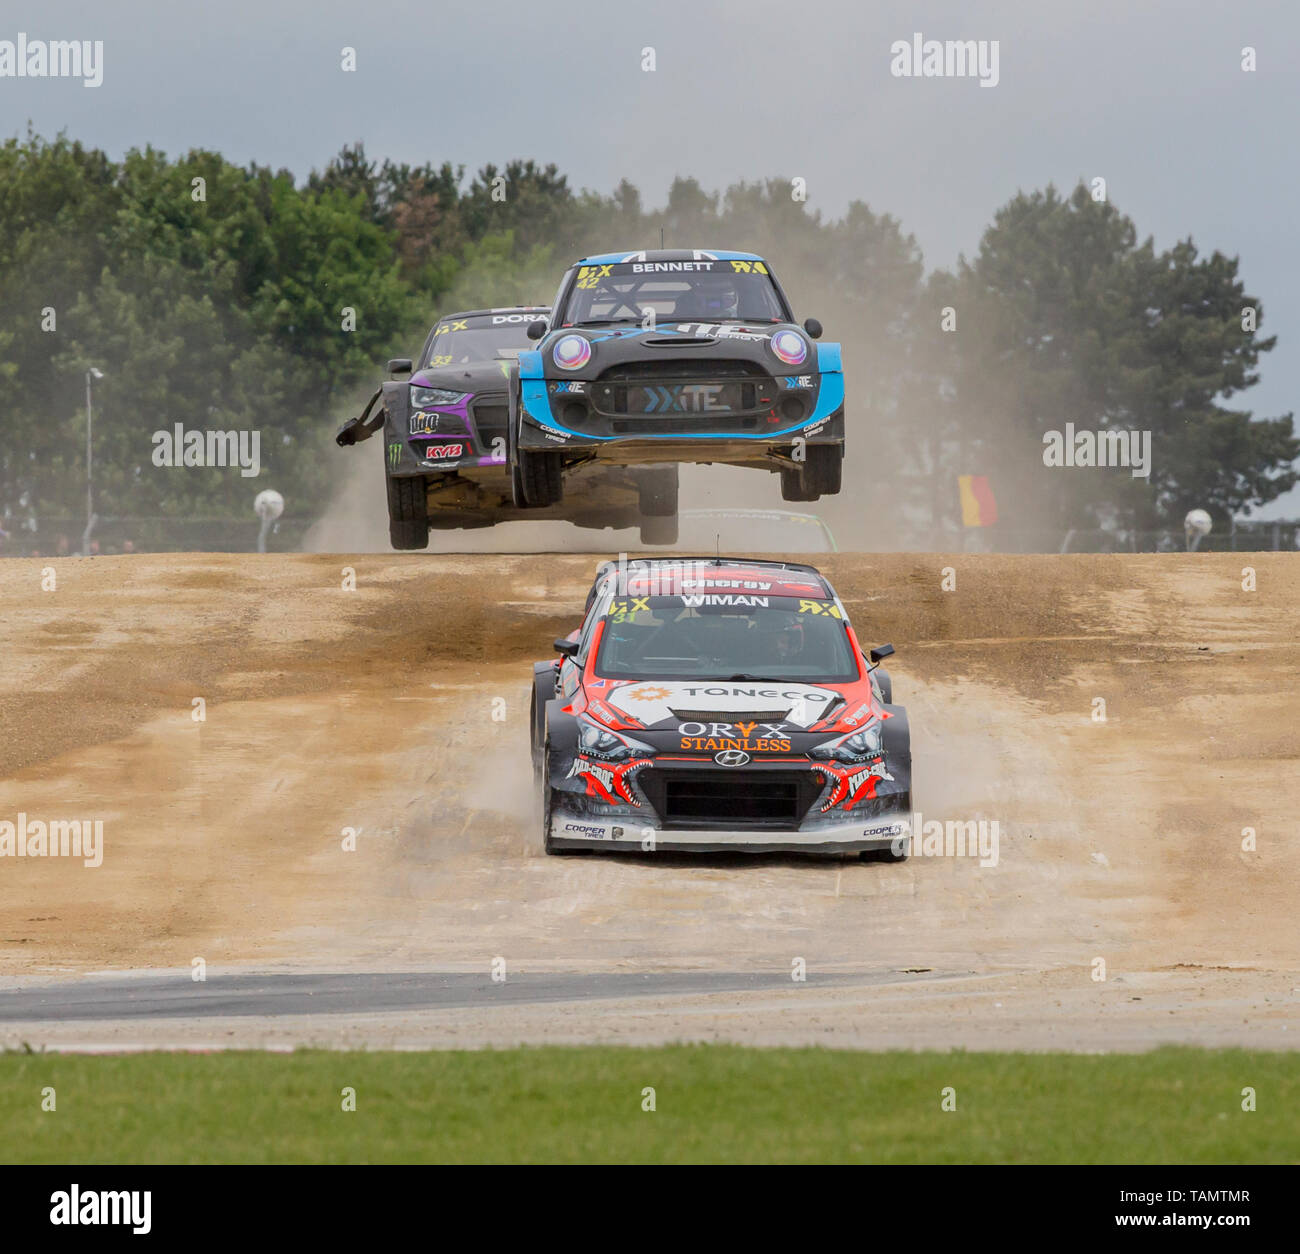 Silverstone, Northampton, UK. 26th May, 2019. 26th May 2019, Silverstone,  Northampton, England, Speedmachine 2019 Festival; Joni Wiman in the Hynandi  i20 for Team GRX Taneco on the jump ahead of Oliver Bennett (